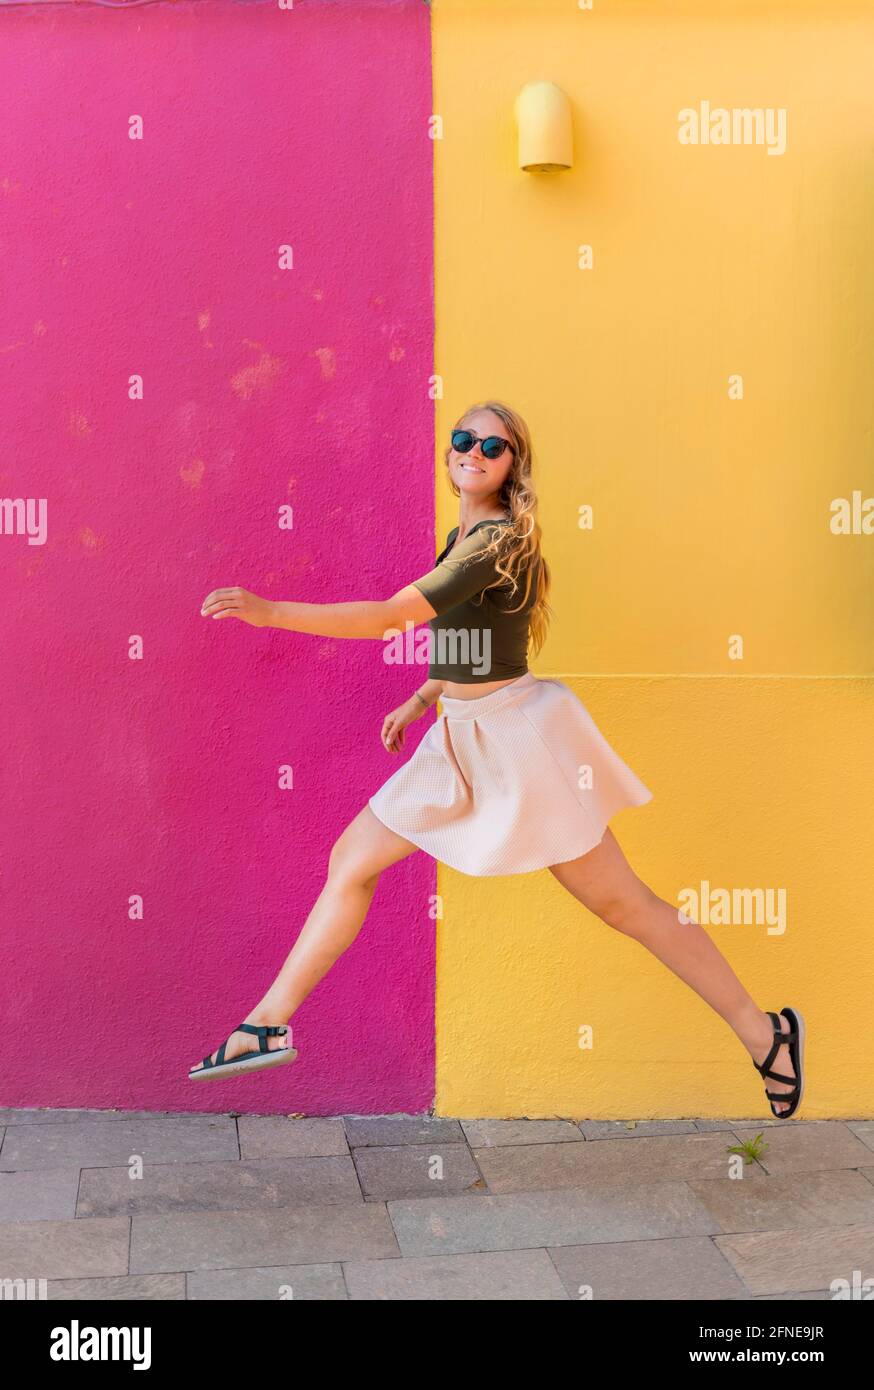 Young woman in dress jumps happily in front of colorful house, yellow and pink house facade, Burano Island, Venice, Veneto, Italy Stock Photo